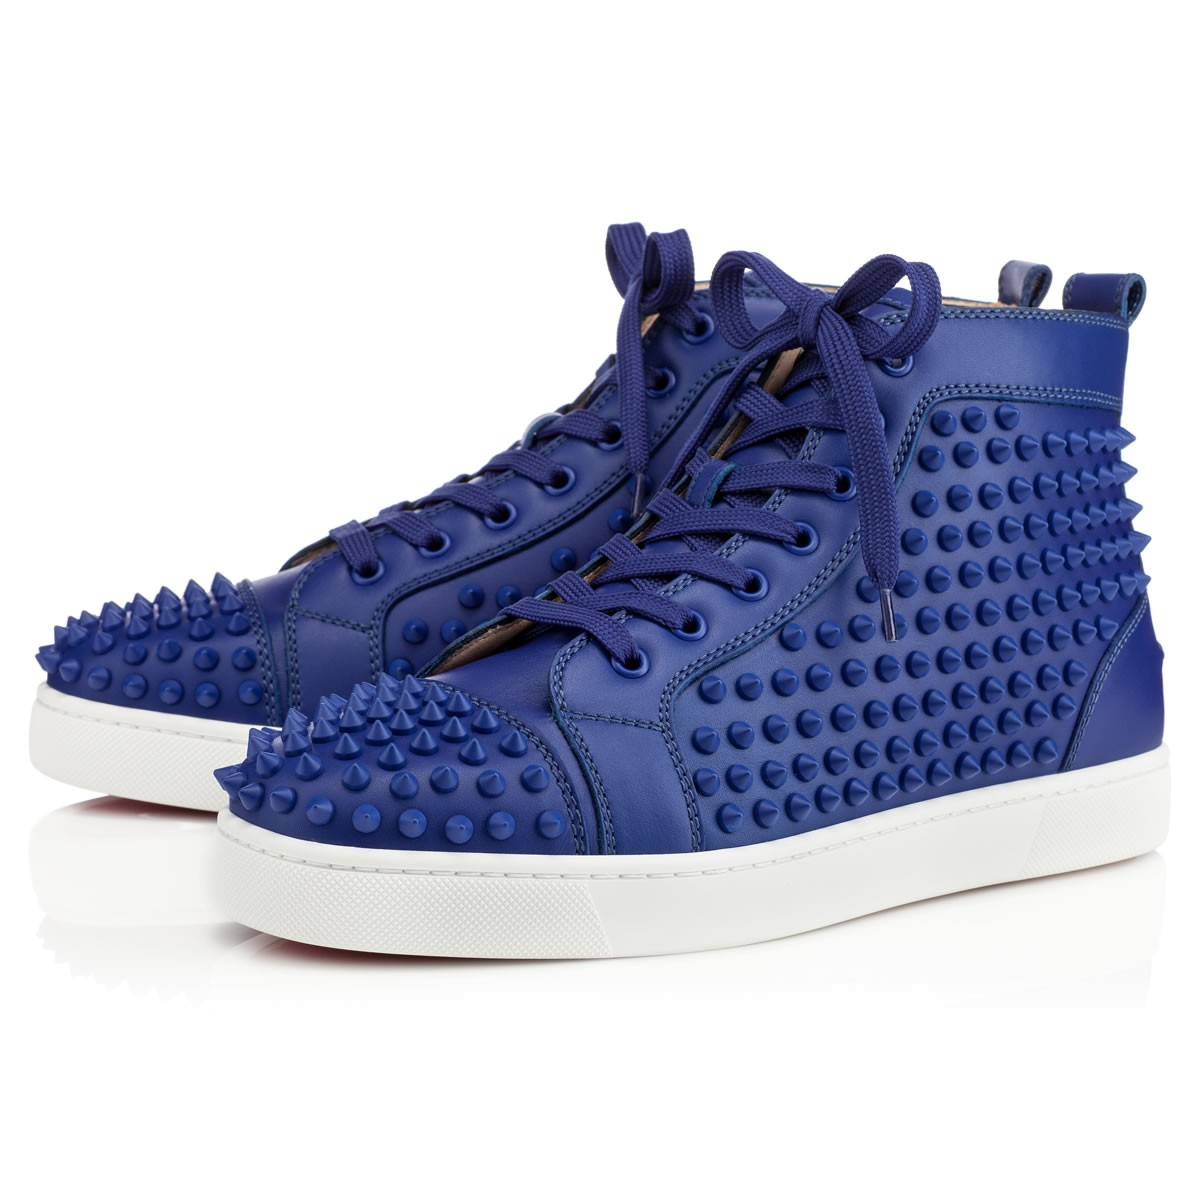 Lyst - Christian Louboutin Louis Spikes Mens Flat in Blue for Men